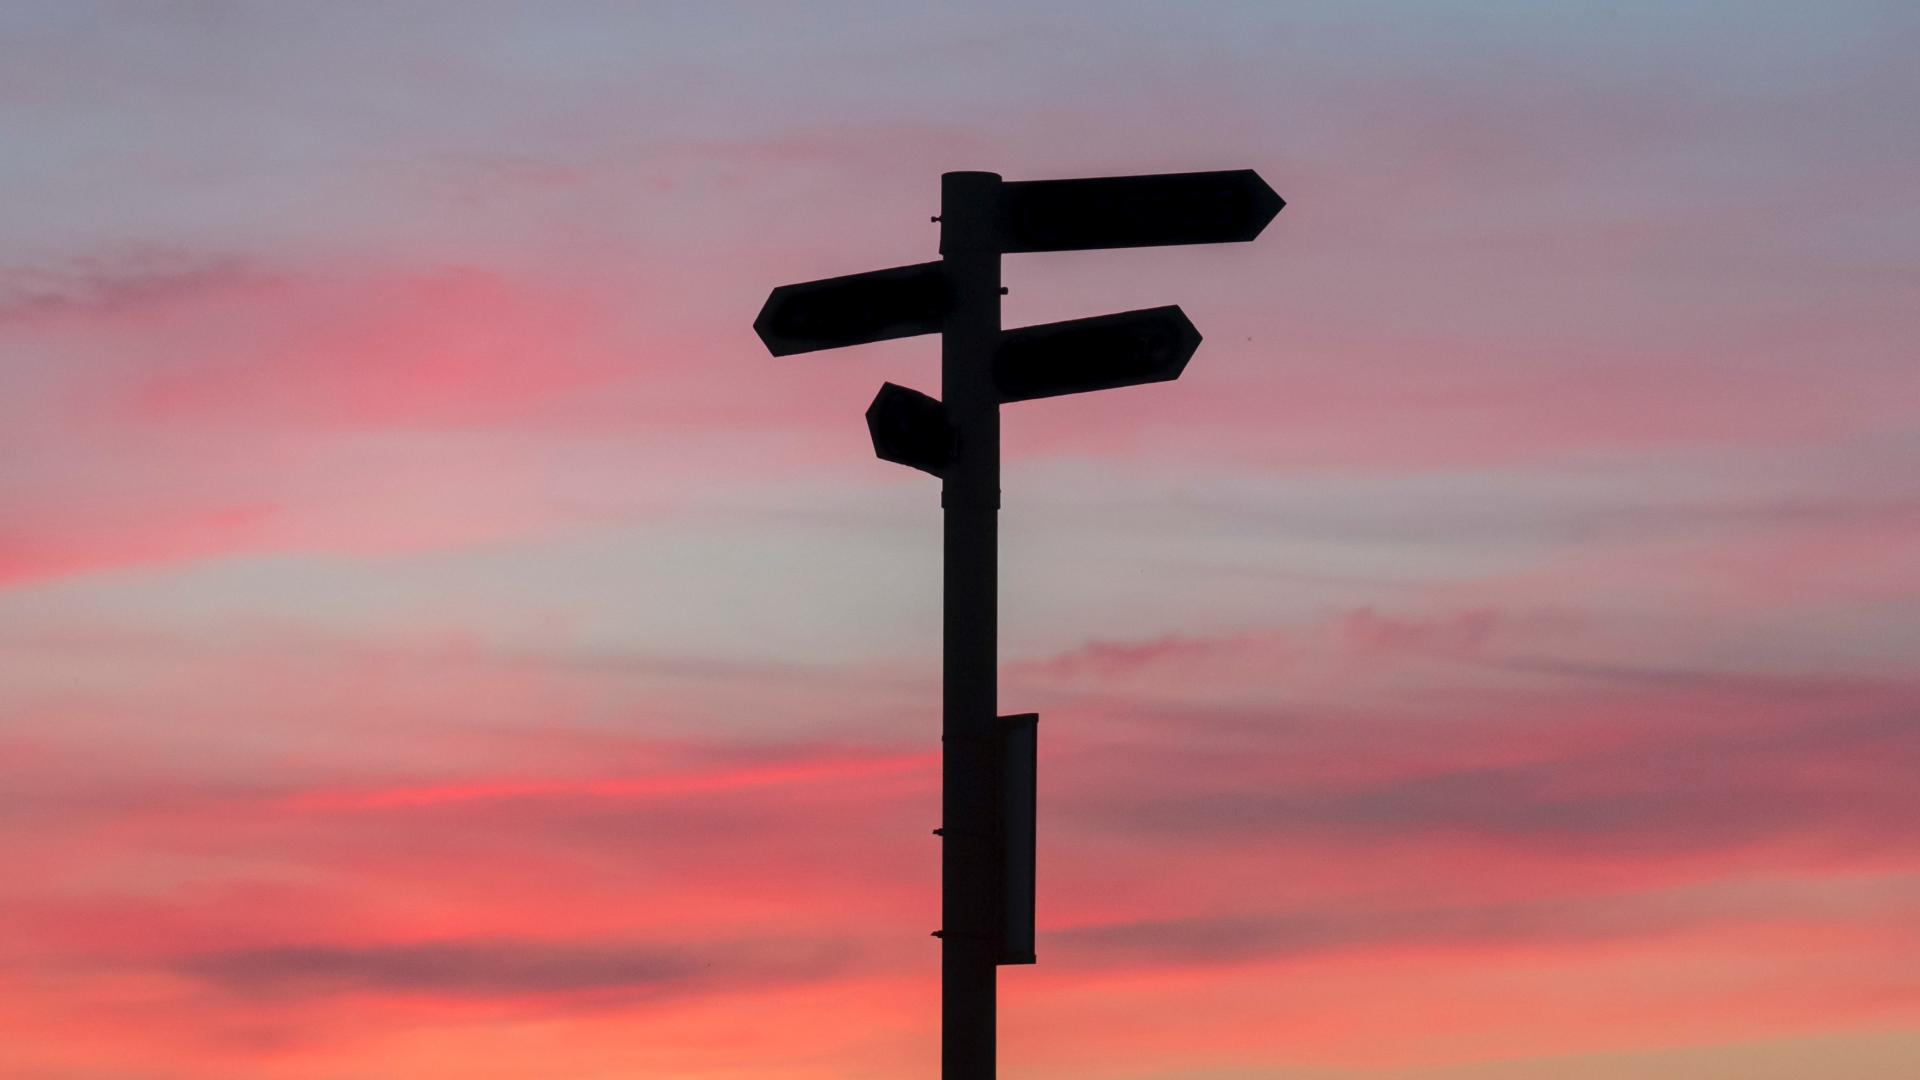 Signpost over a sunset